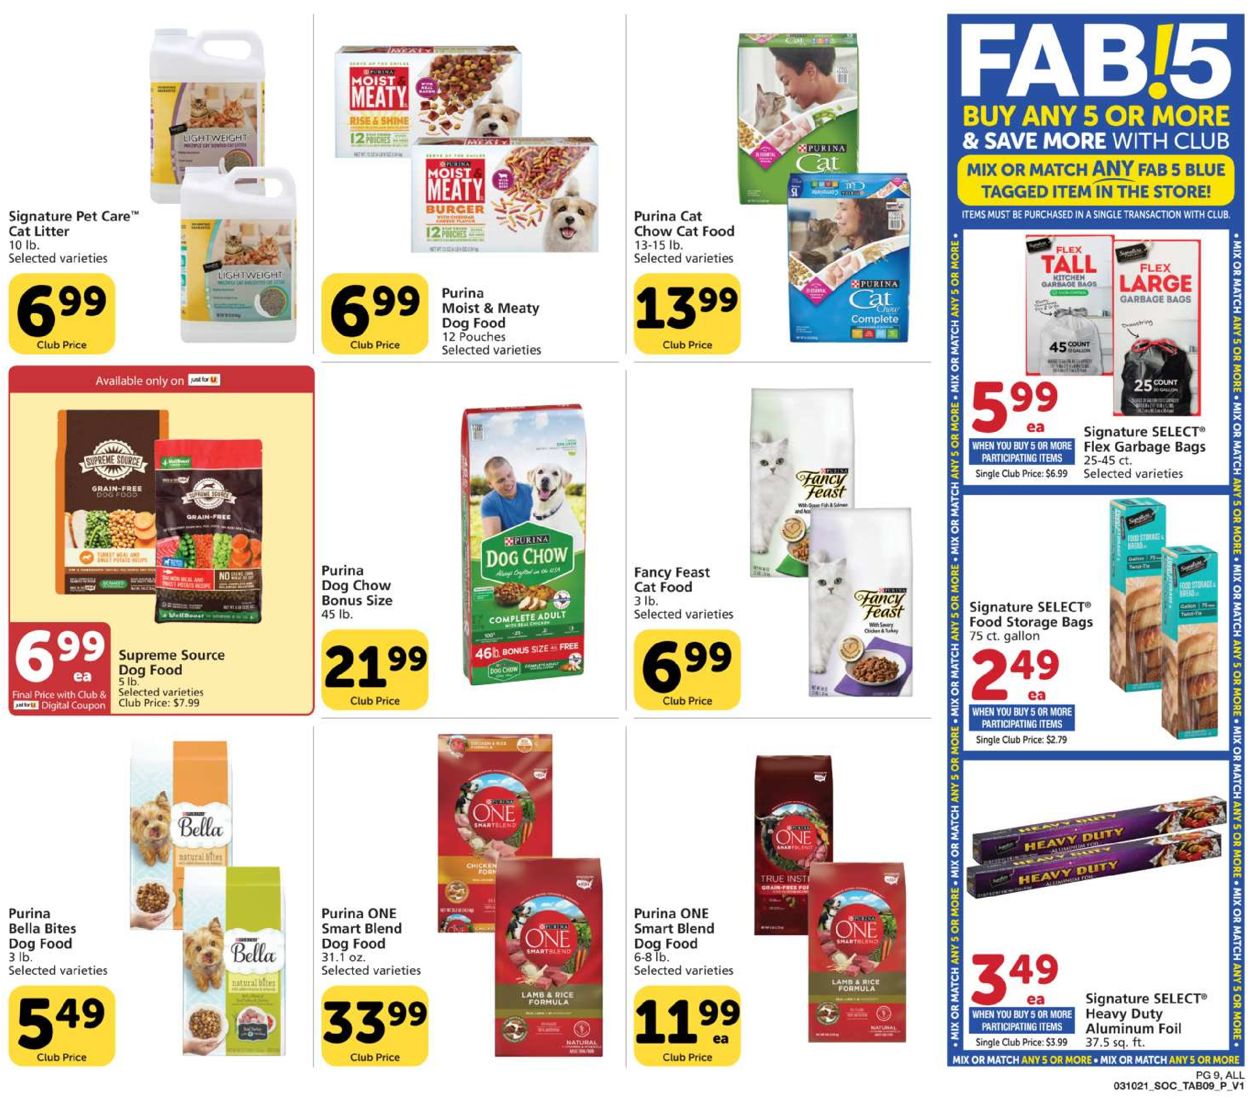 Pavilions Ad from 03/10/2021